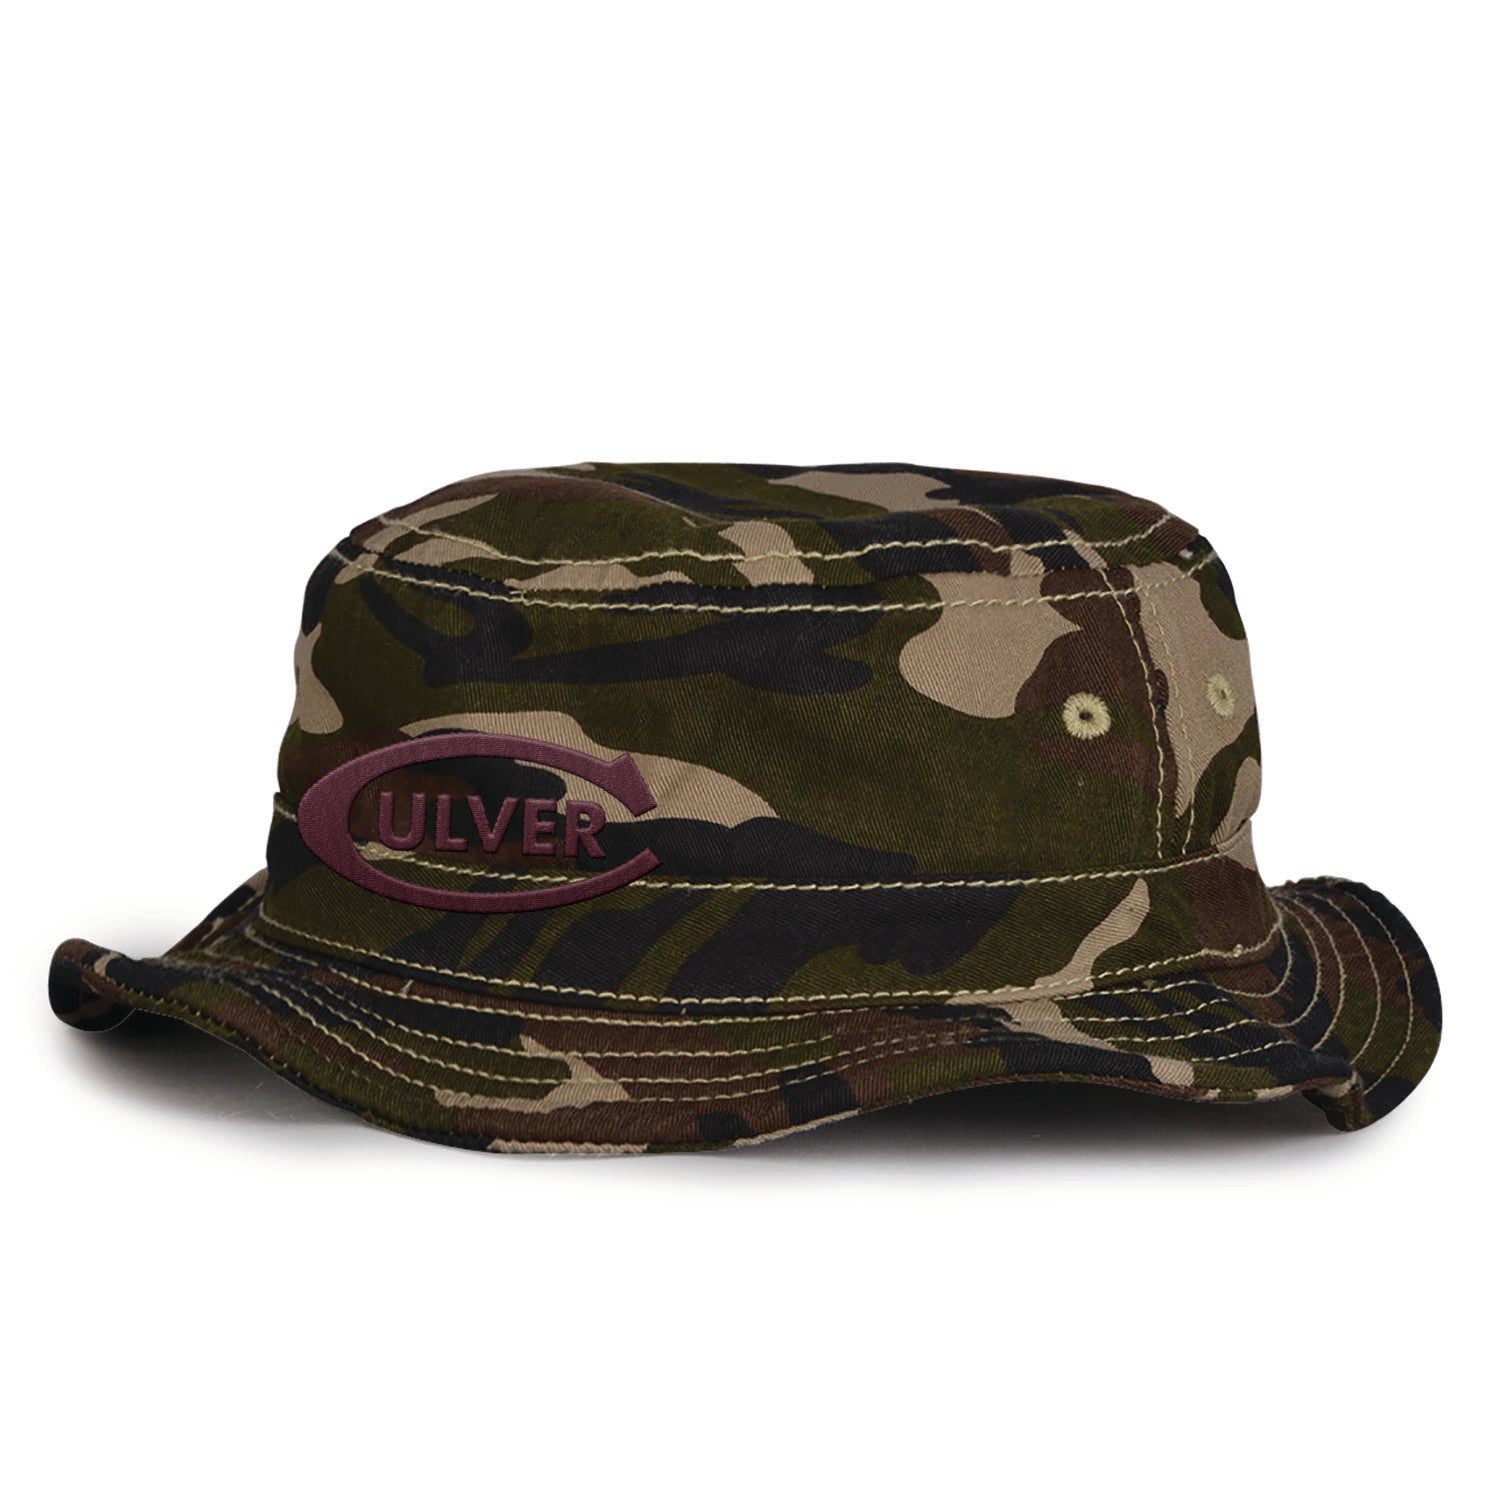 Youth Bucket in Camo